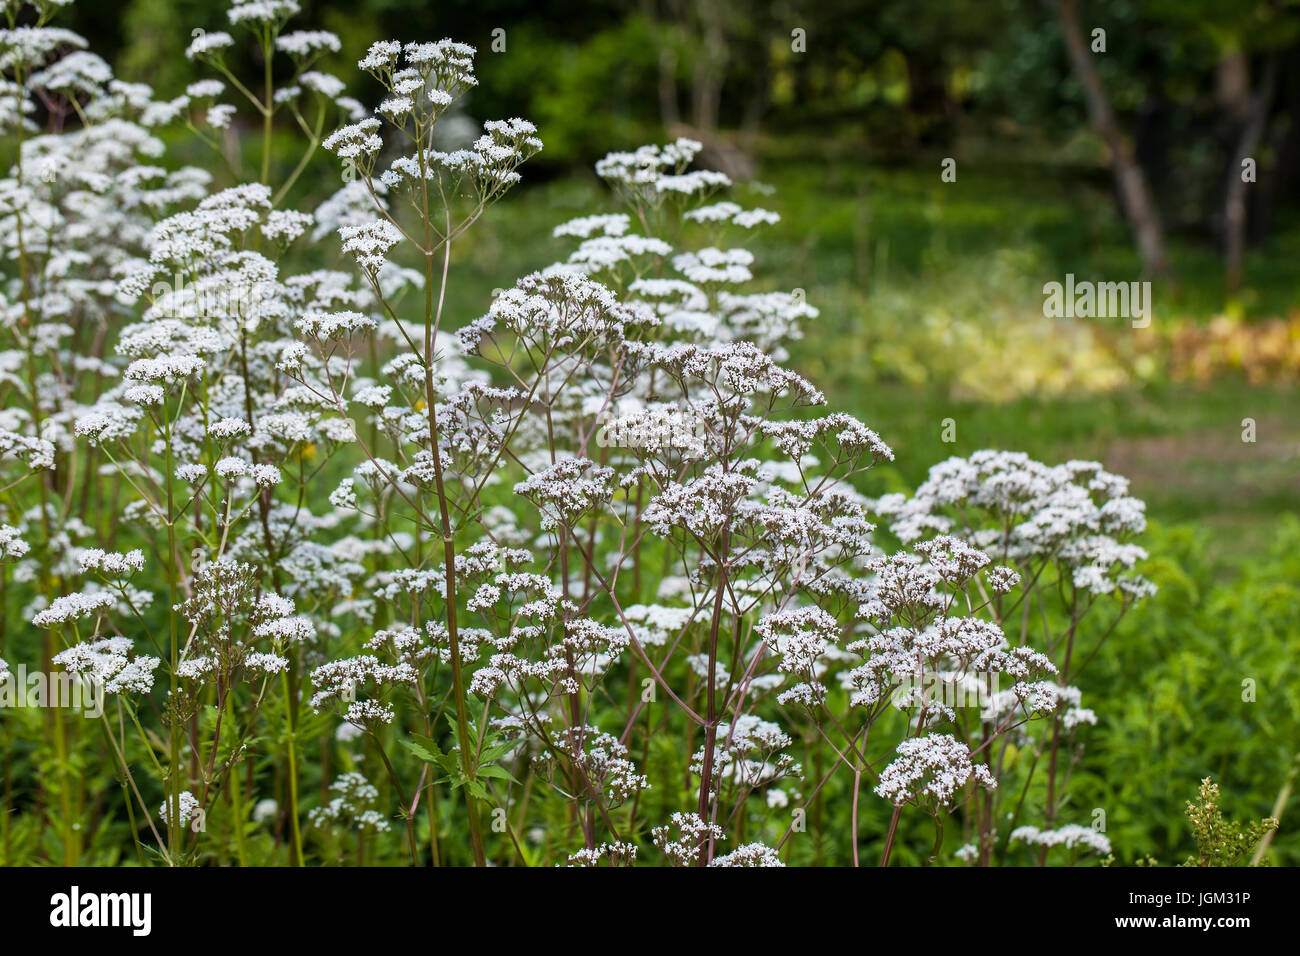 Flowers of Valeriana Officinalis or Valerian plant, used to treat insomnia in herbal medicine, in the herbs garden at summer Stock Photo